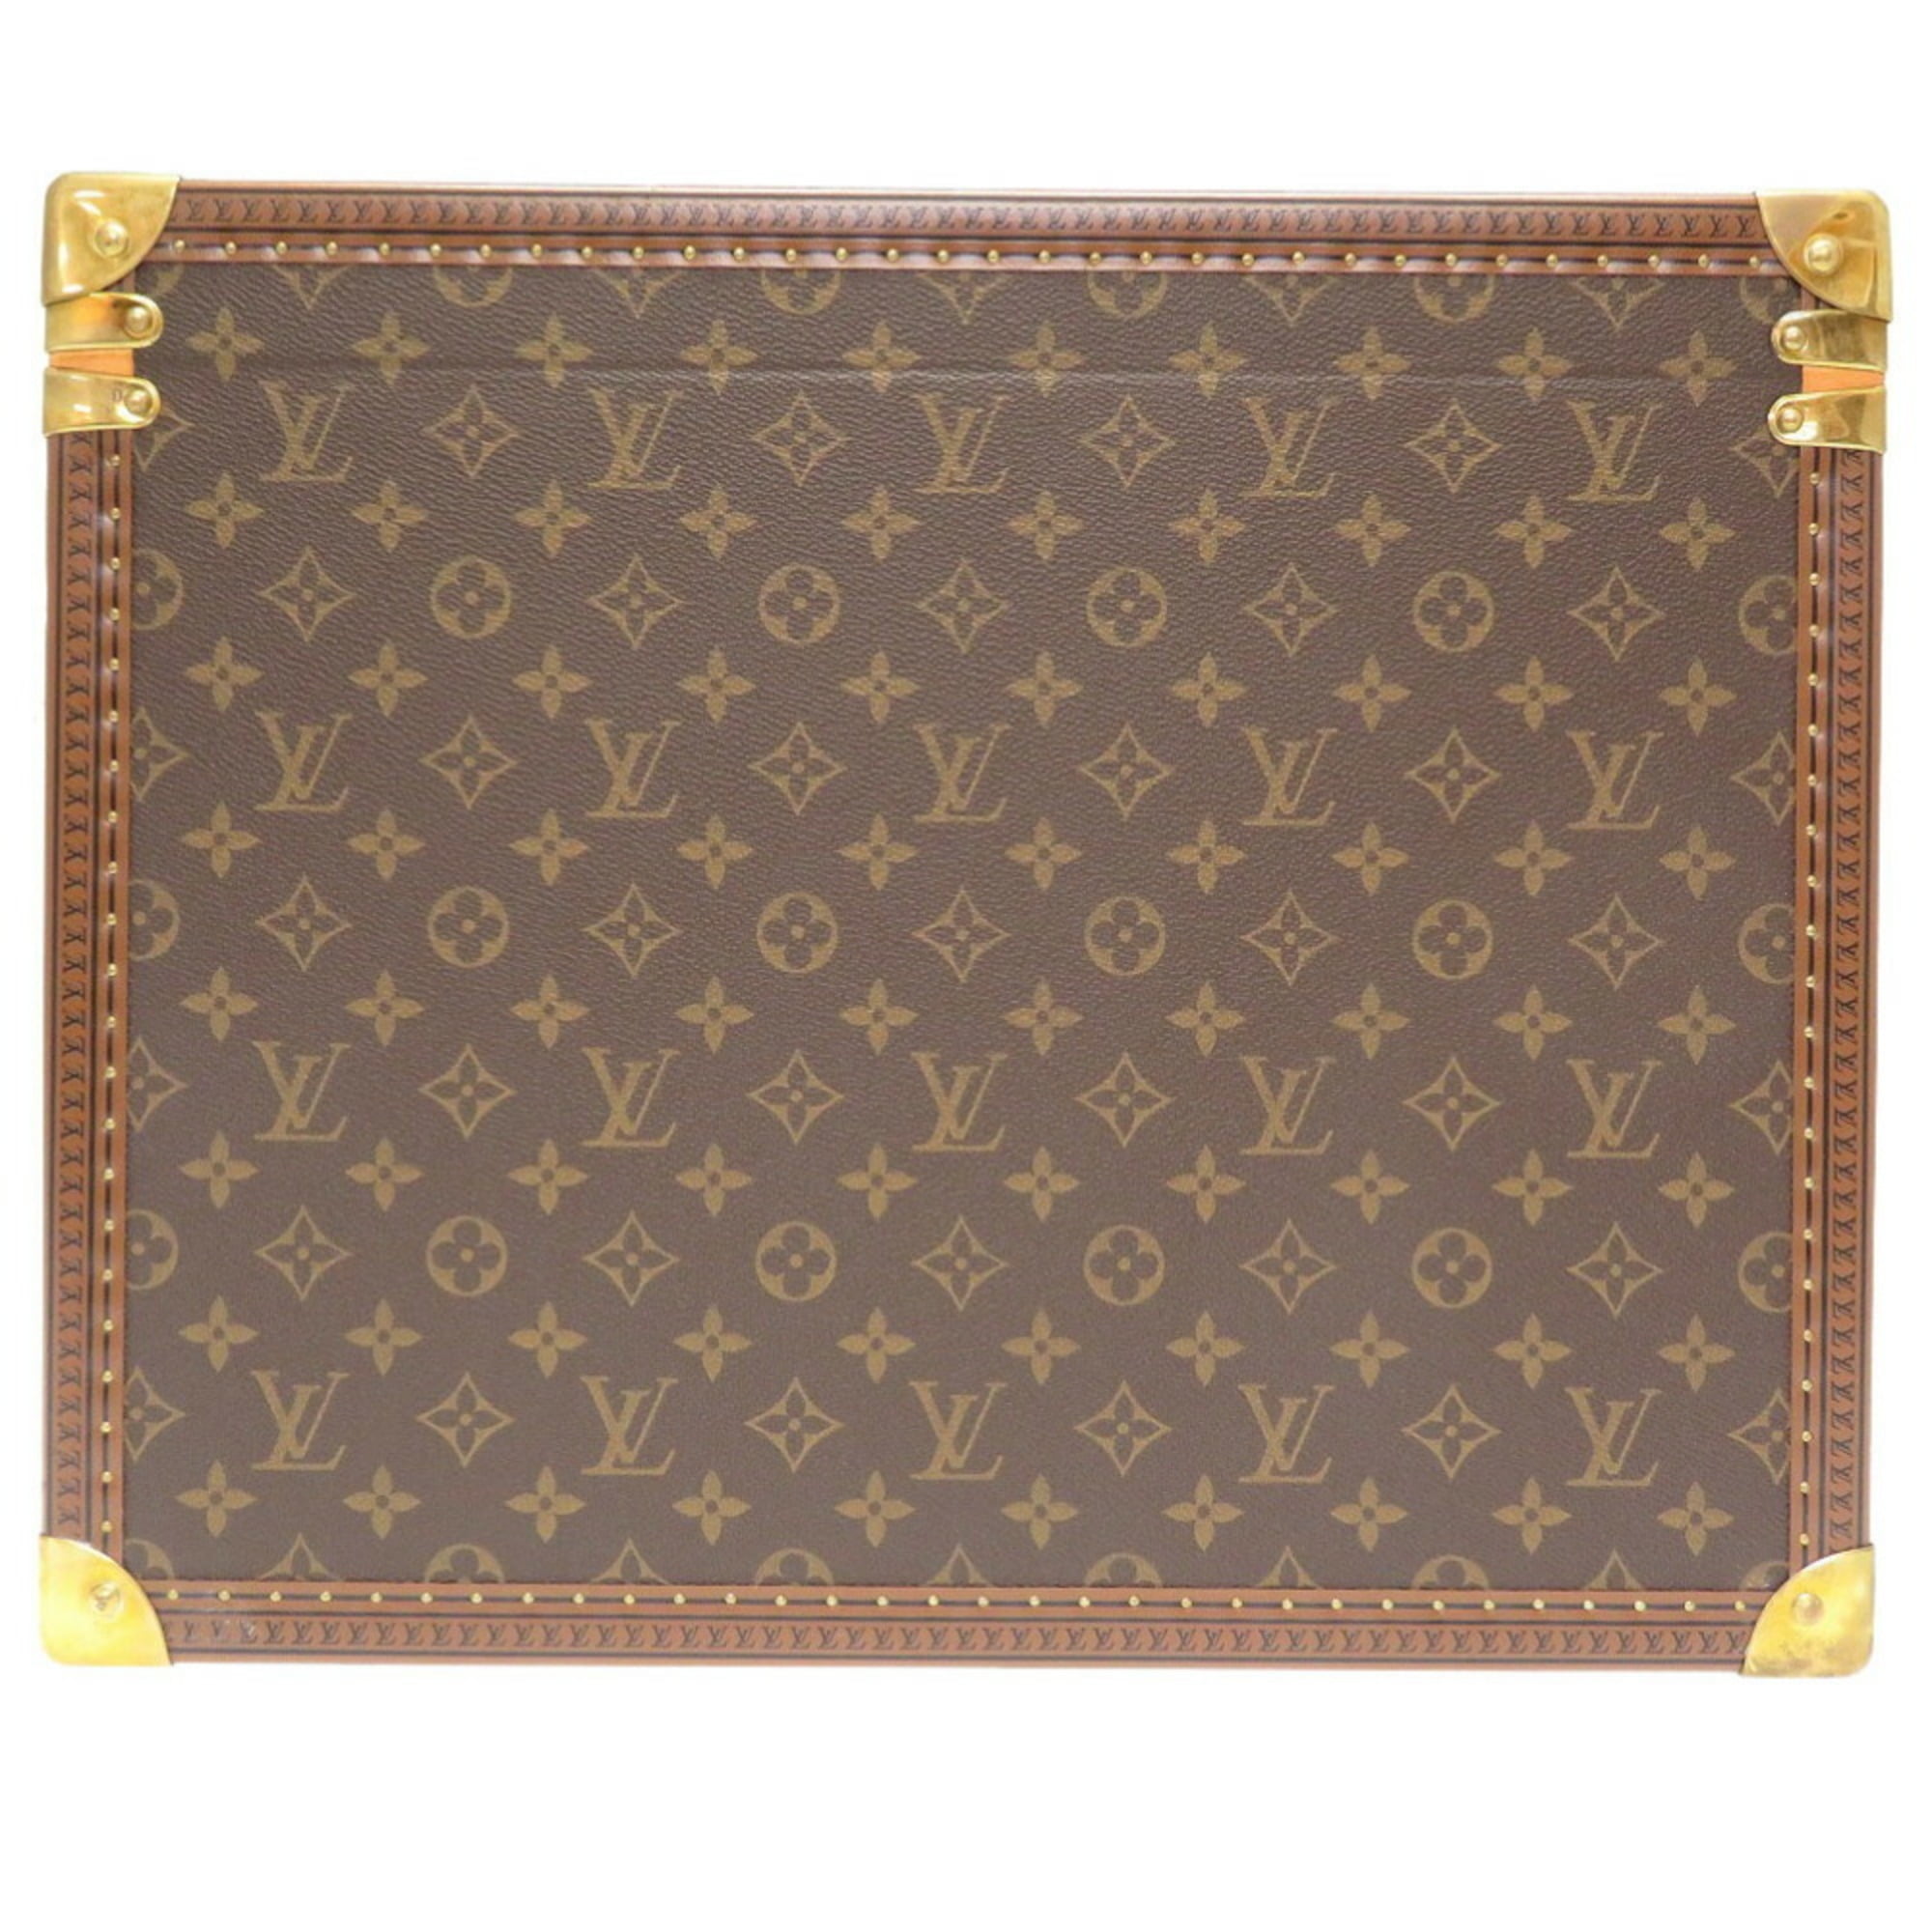 Authenticated Used Louis Vuitton Monogram Champagne Case M21825